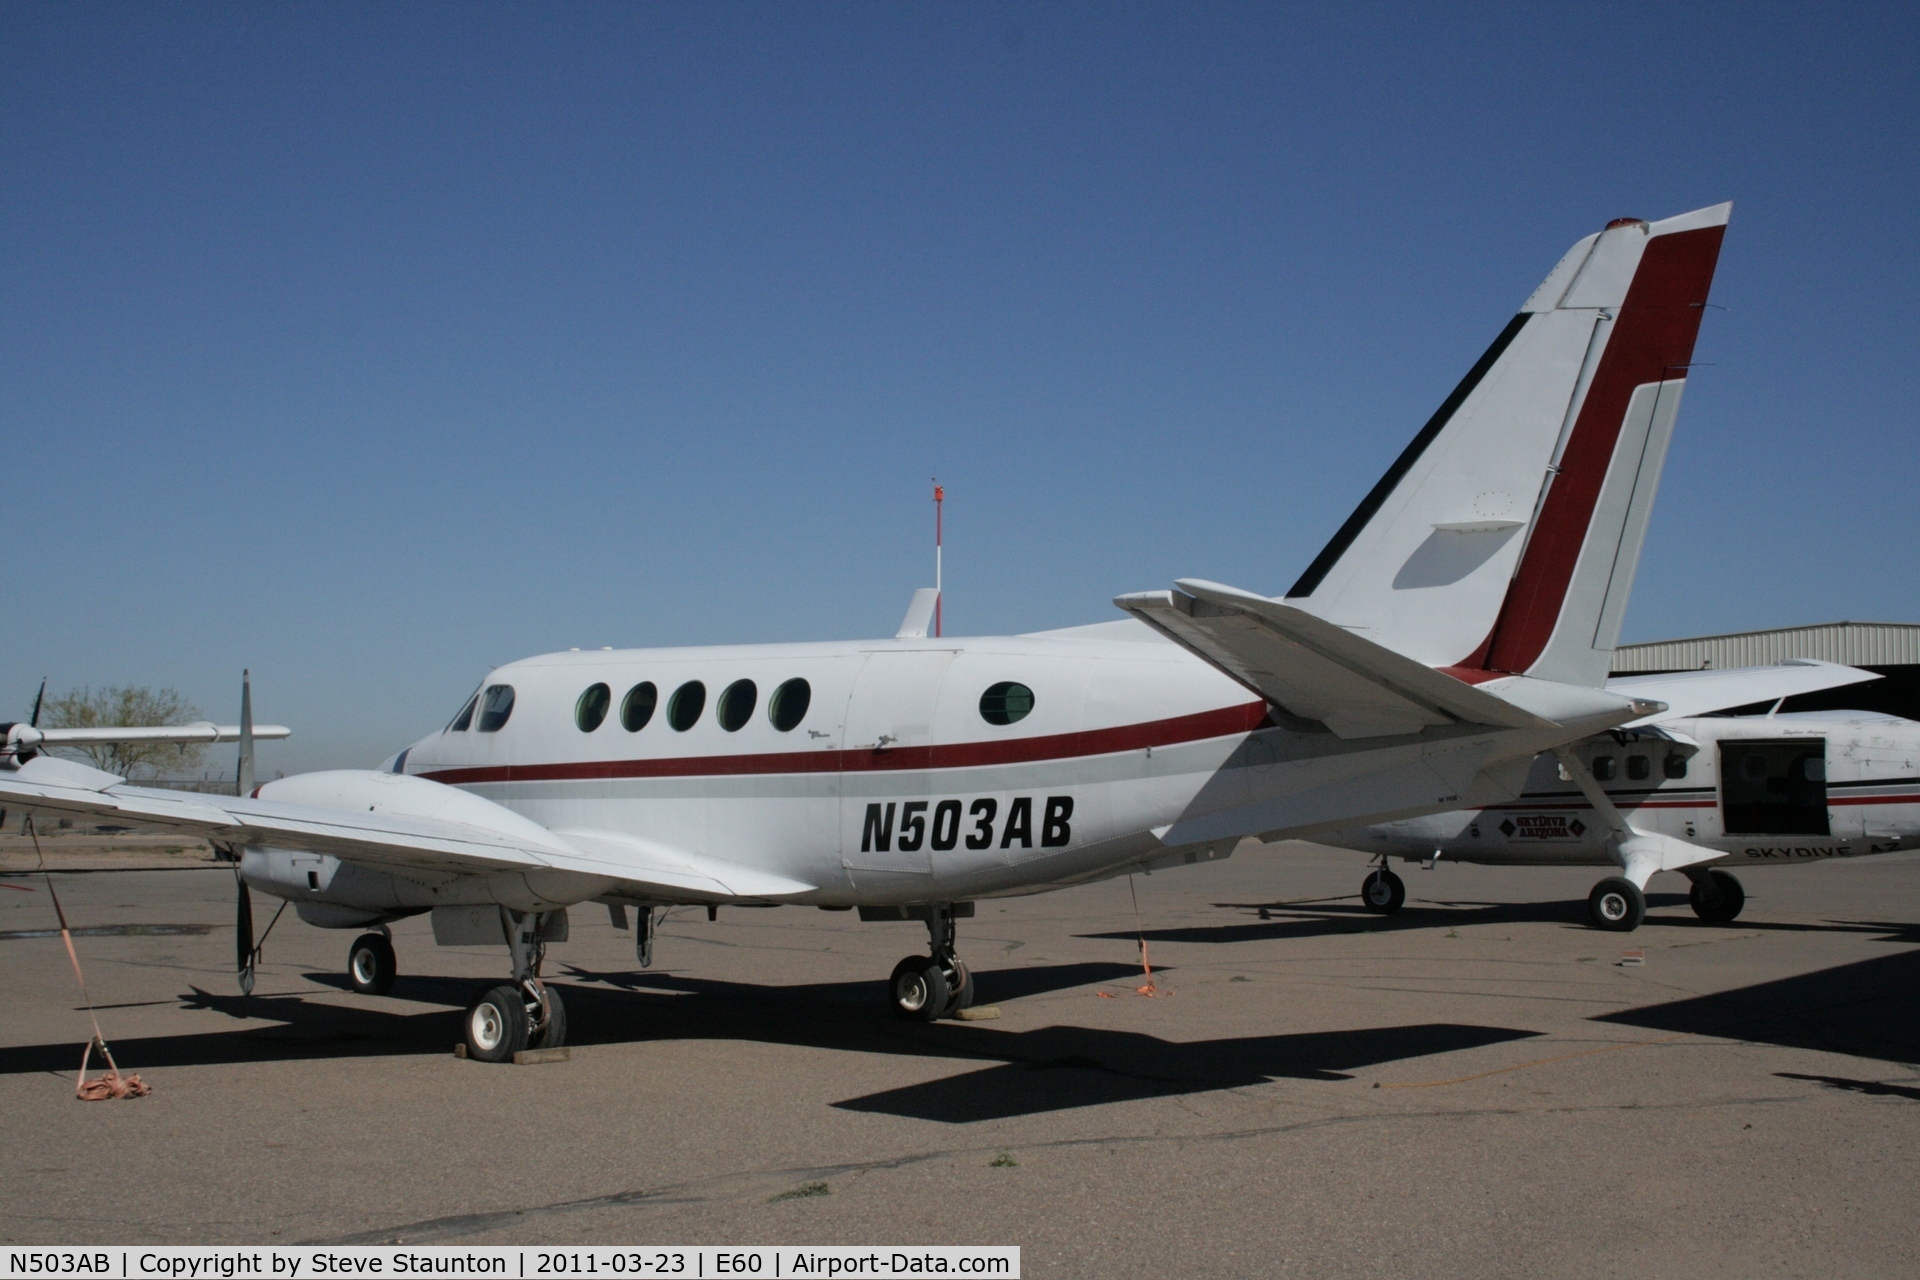 N503AB, 1970 Beech 100 King Air C/N B-18, Taken at Eloy Airport, in March 2011 whilst on an Aeroprint Aviation tour